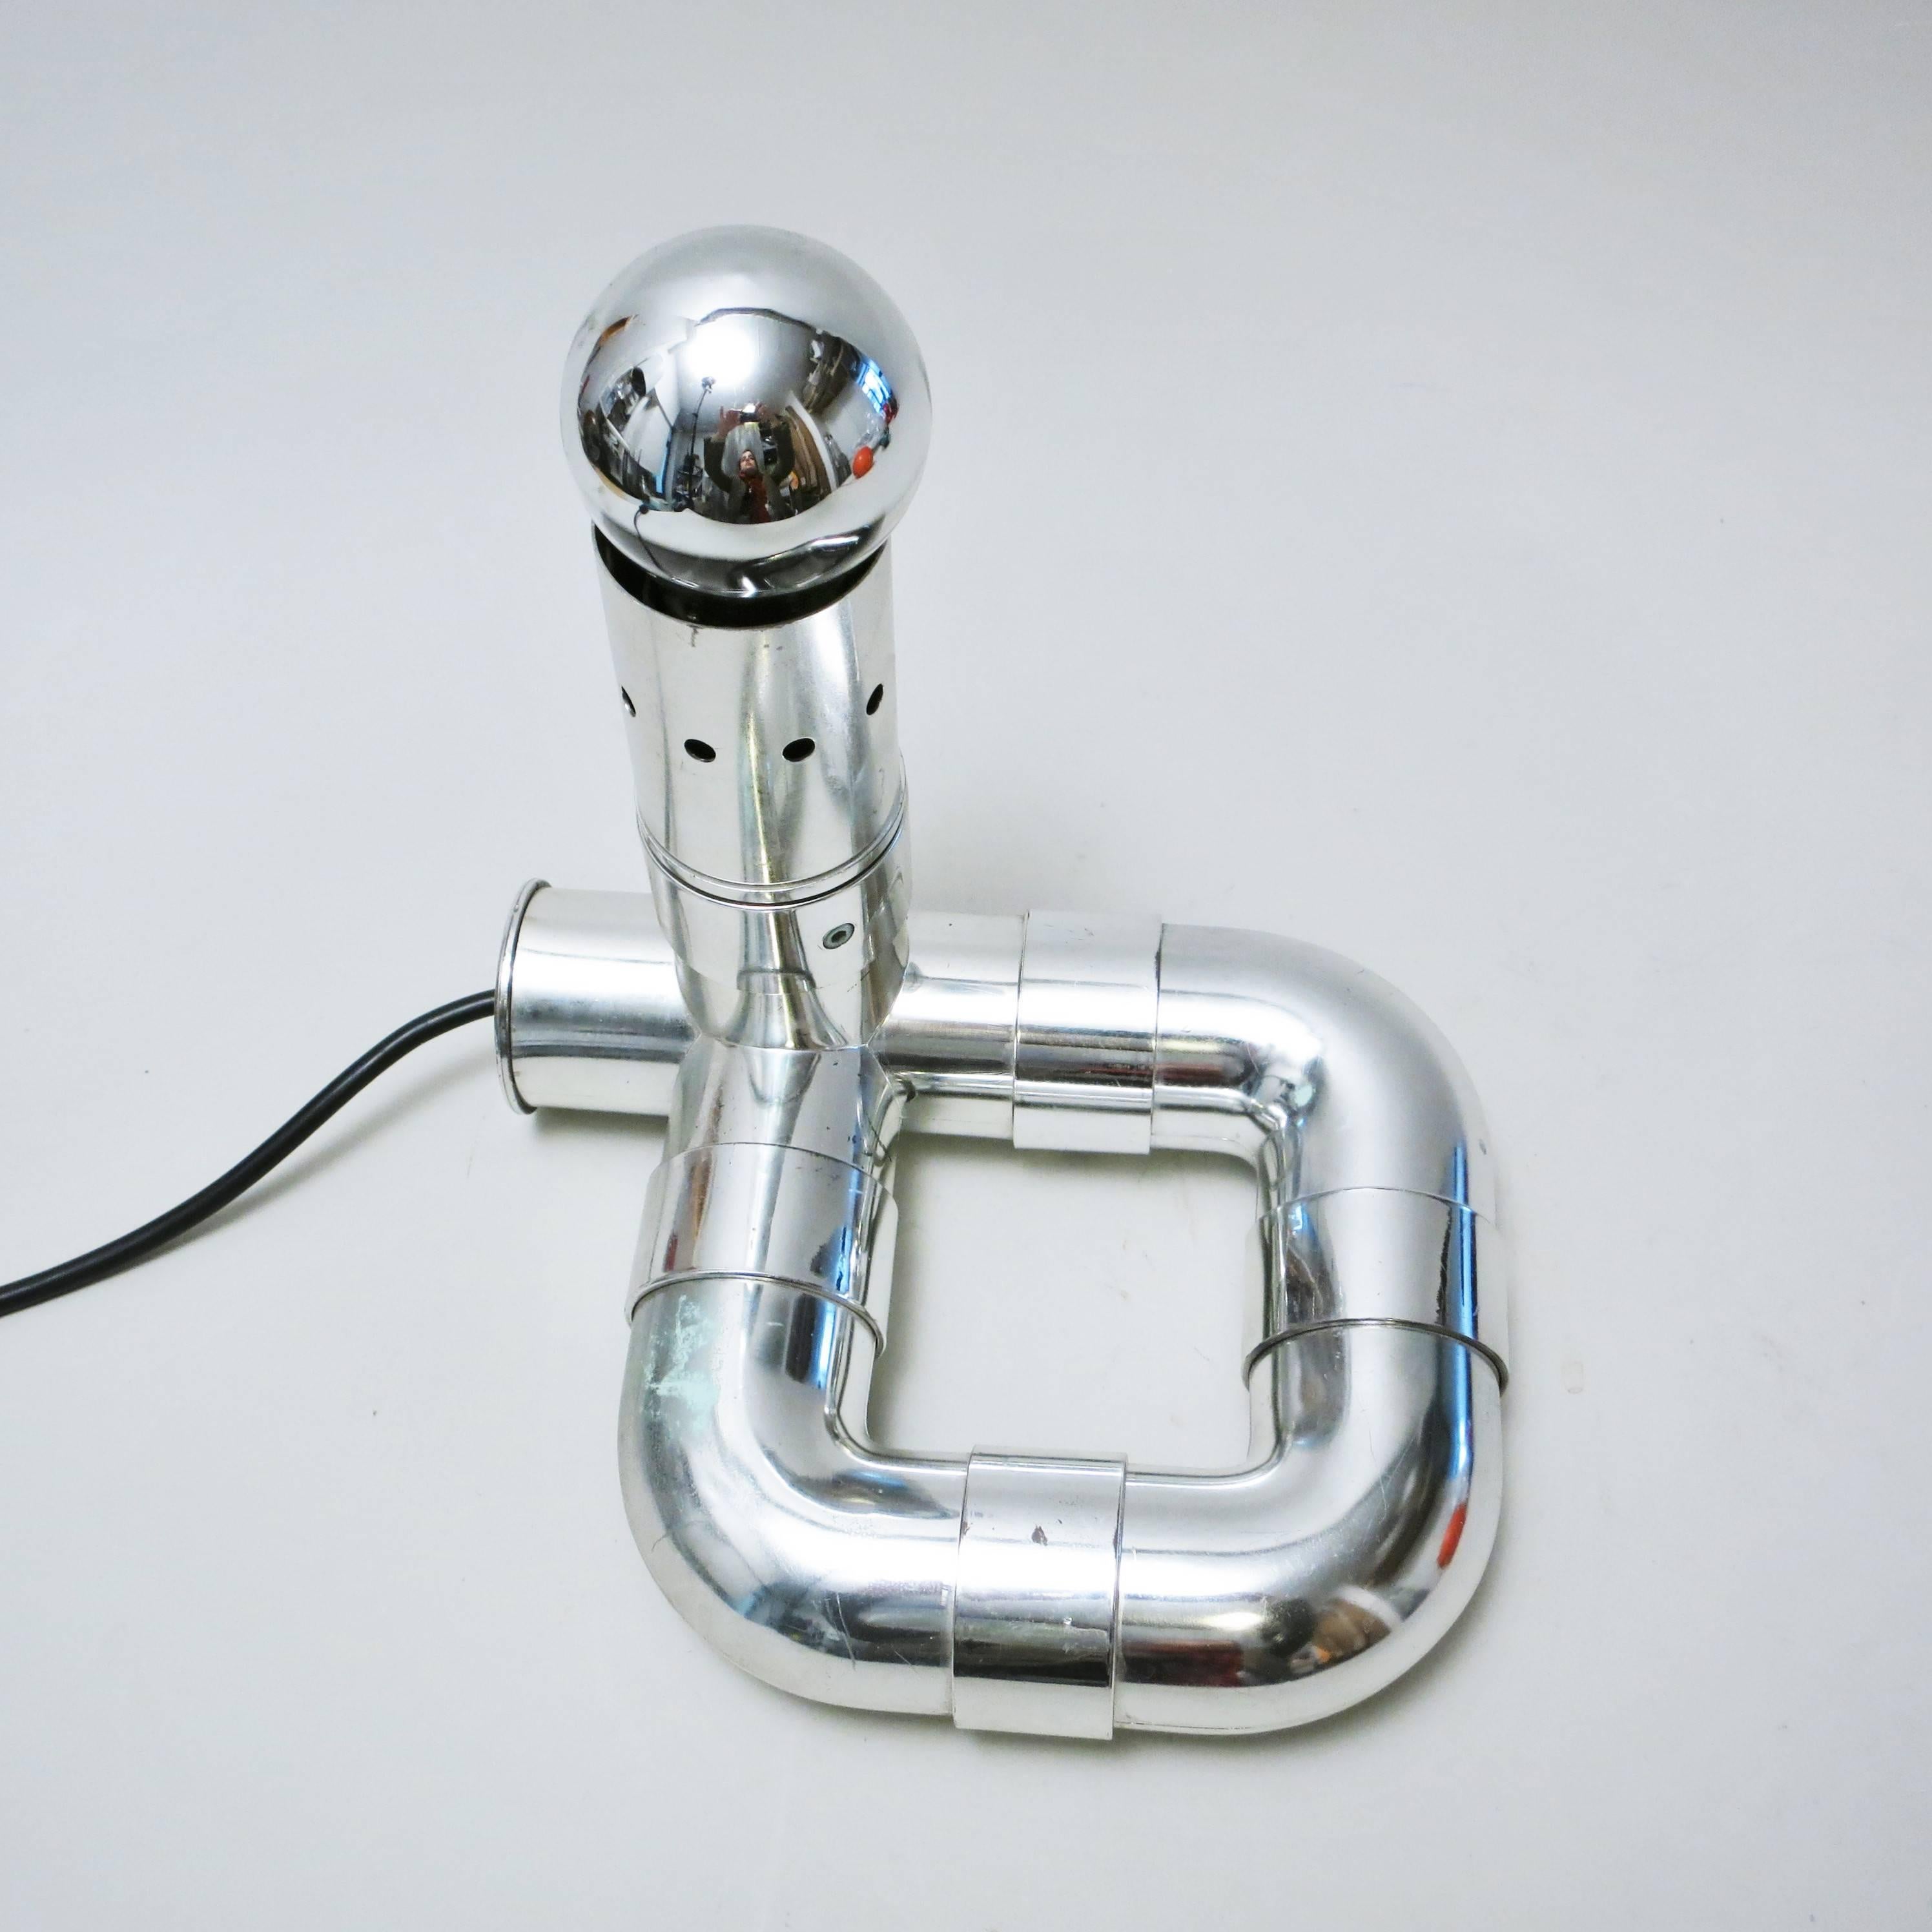 Lamp Rombo designed and produced by Gaetano Missaglia in Italy, circa 1965. It puts together chromed ABS plastic pipes in a radical and Futurist design.